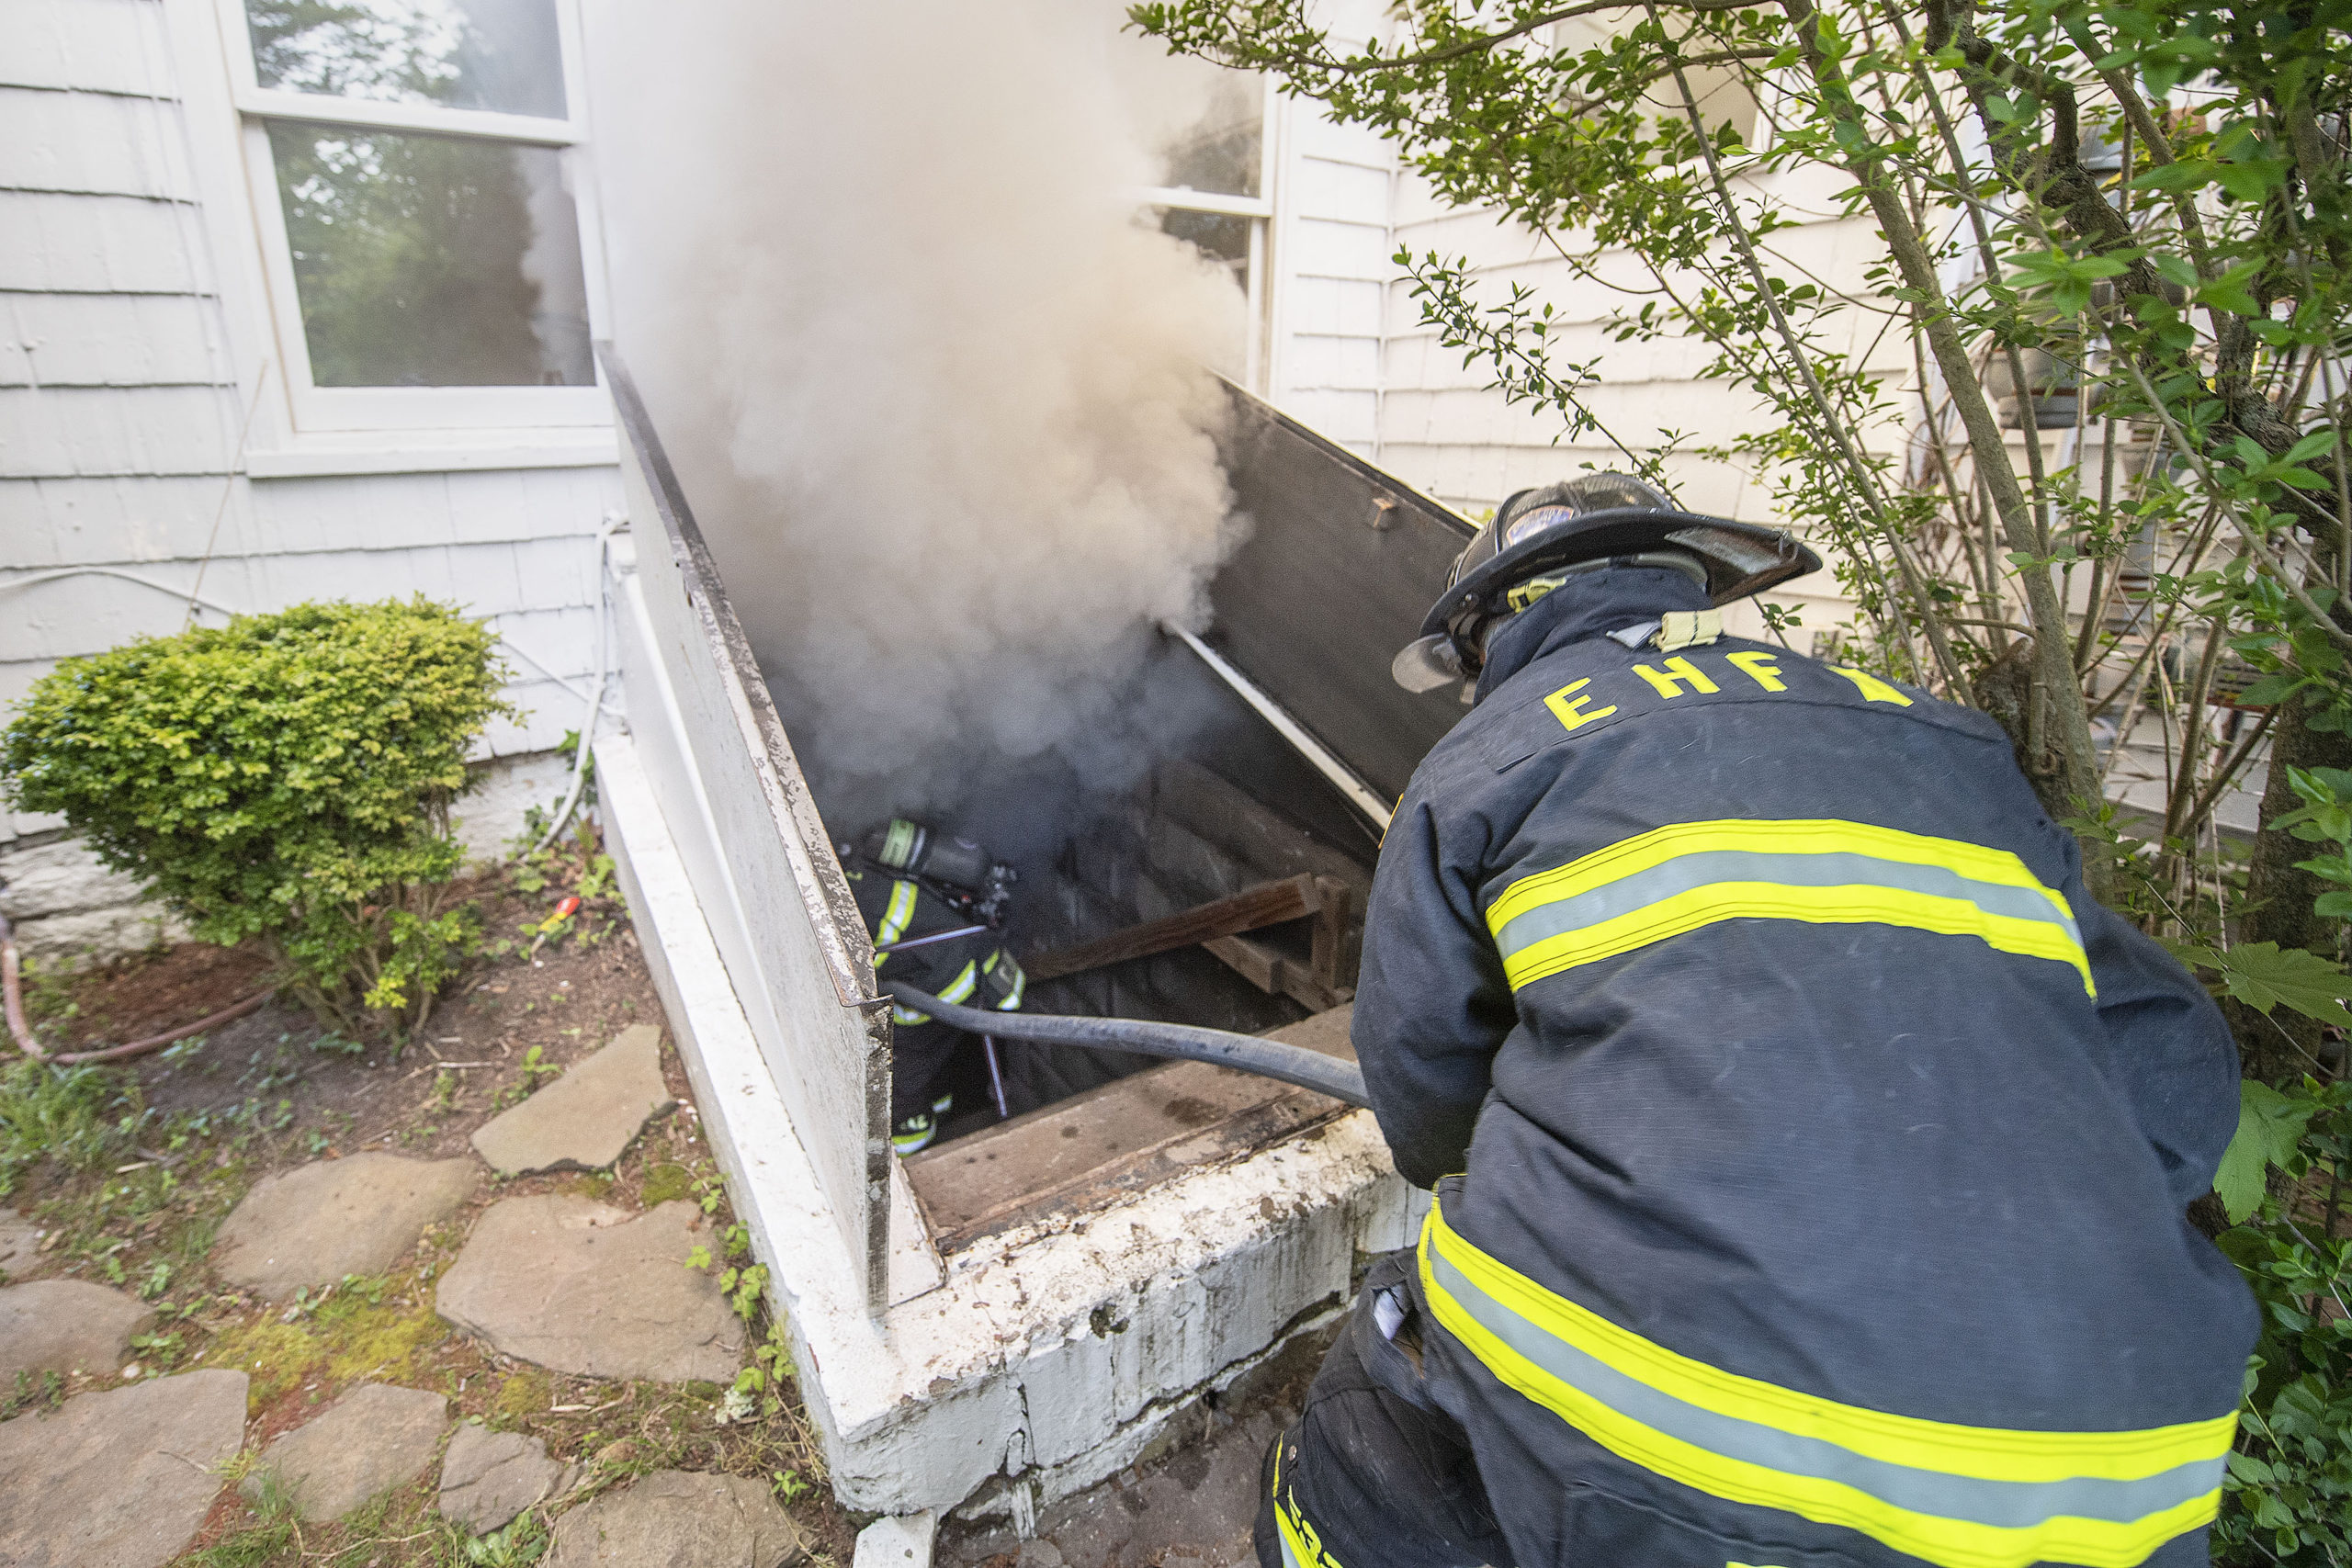 Firefighters battled a fire in the basement of Moby's restaurant in East Hampton on Friday morning.